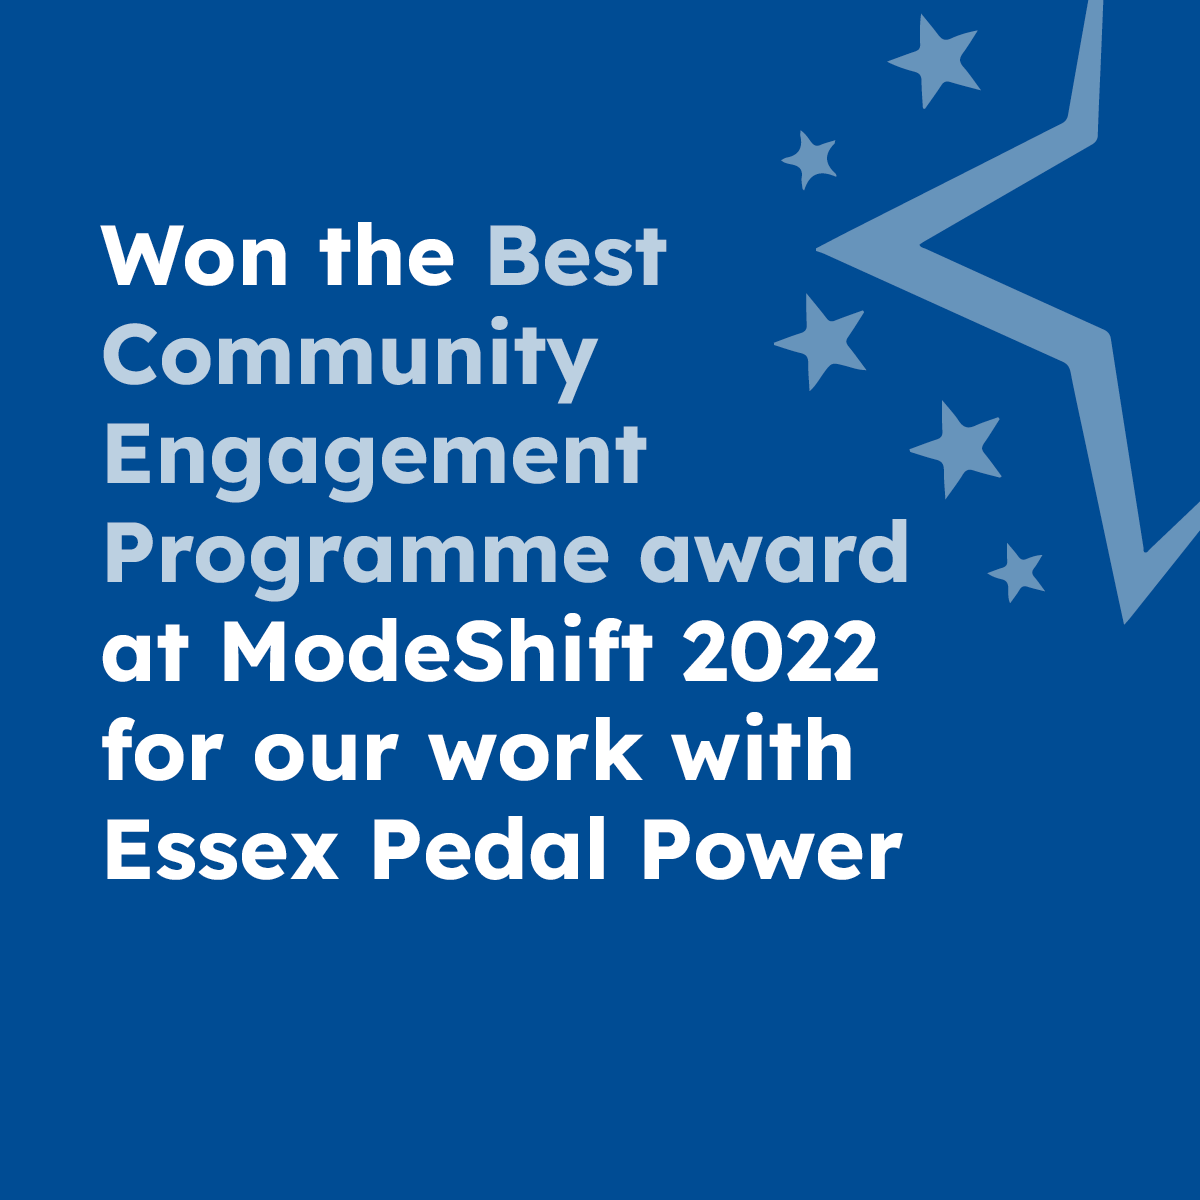 Won the best Community Engagement Programme award at ModeShift 2022 for our work with Essex Pedal Power